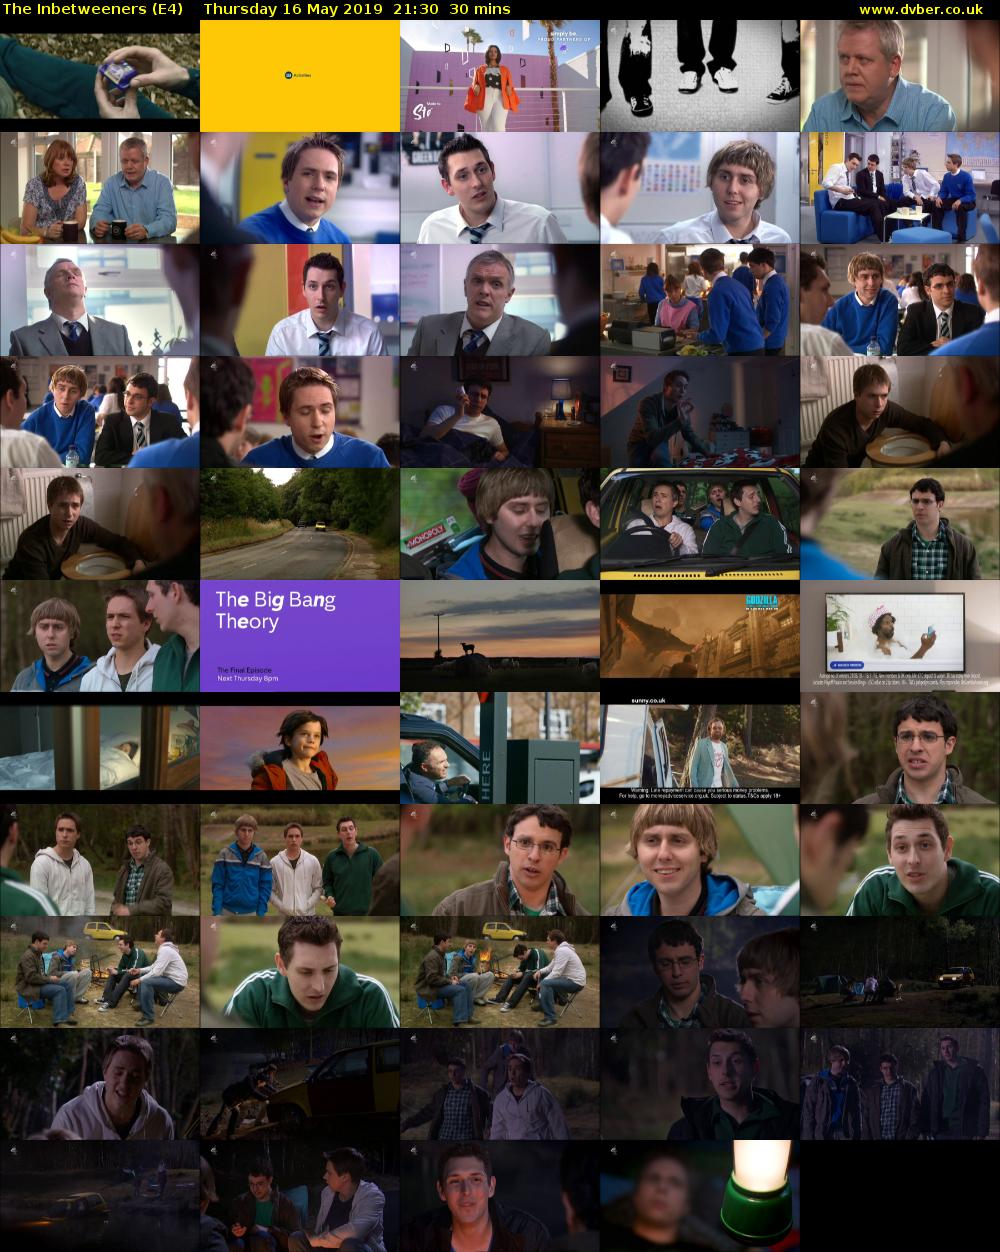 The Inbetweeners (E4) Thursday 16 May 2019 21:30 - 22:00